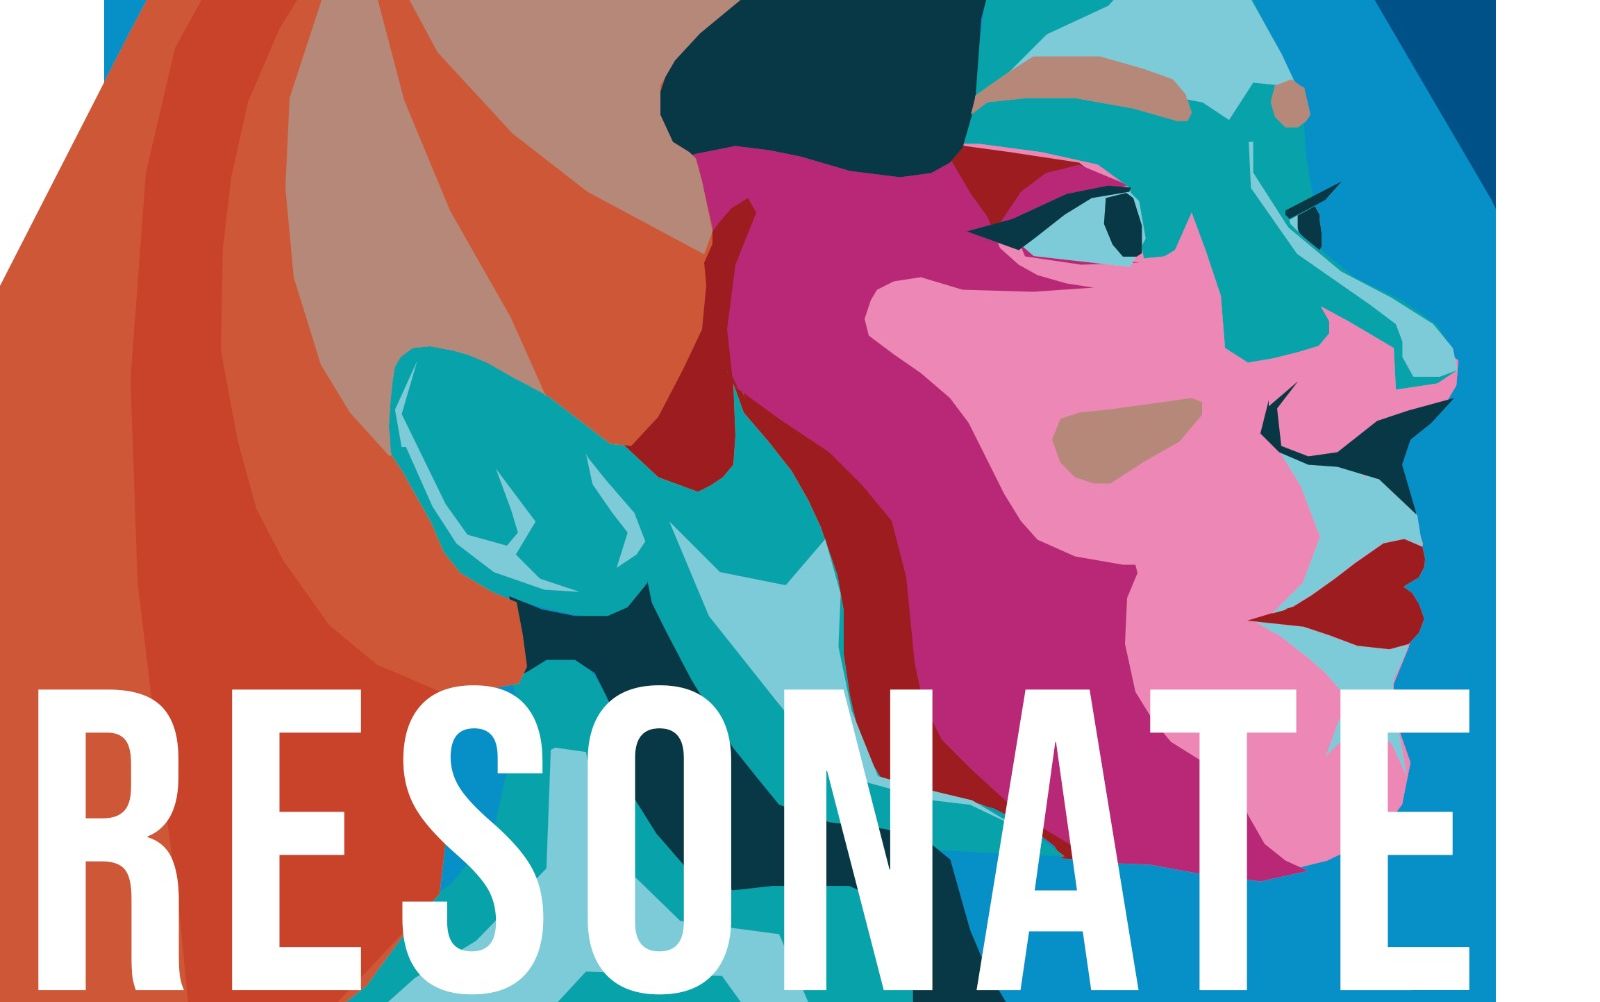 New Artist Spotlight: Antman Ant's New Album Will 'Resonate' With EDM and Ambient Fans Alike